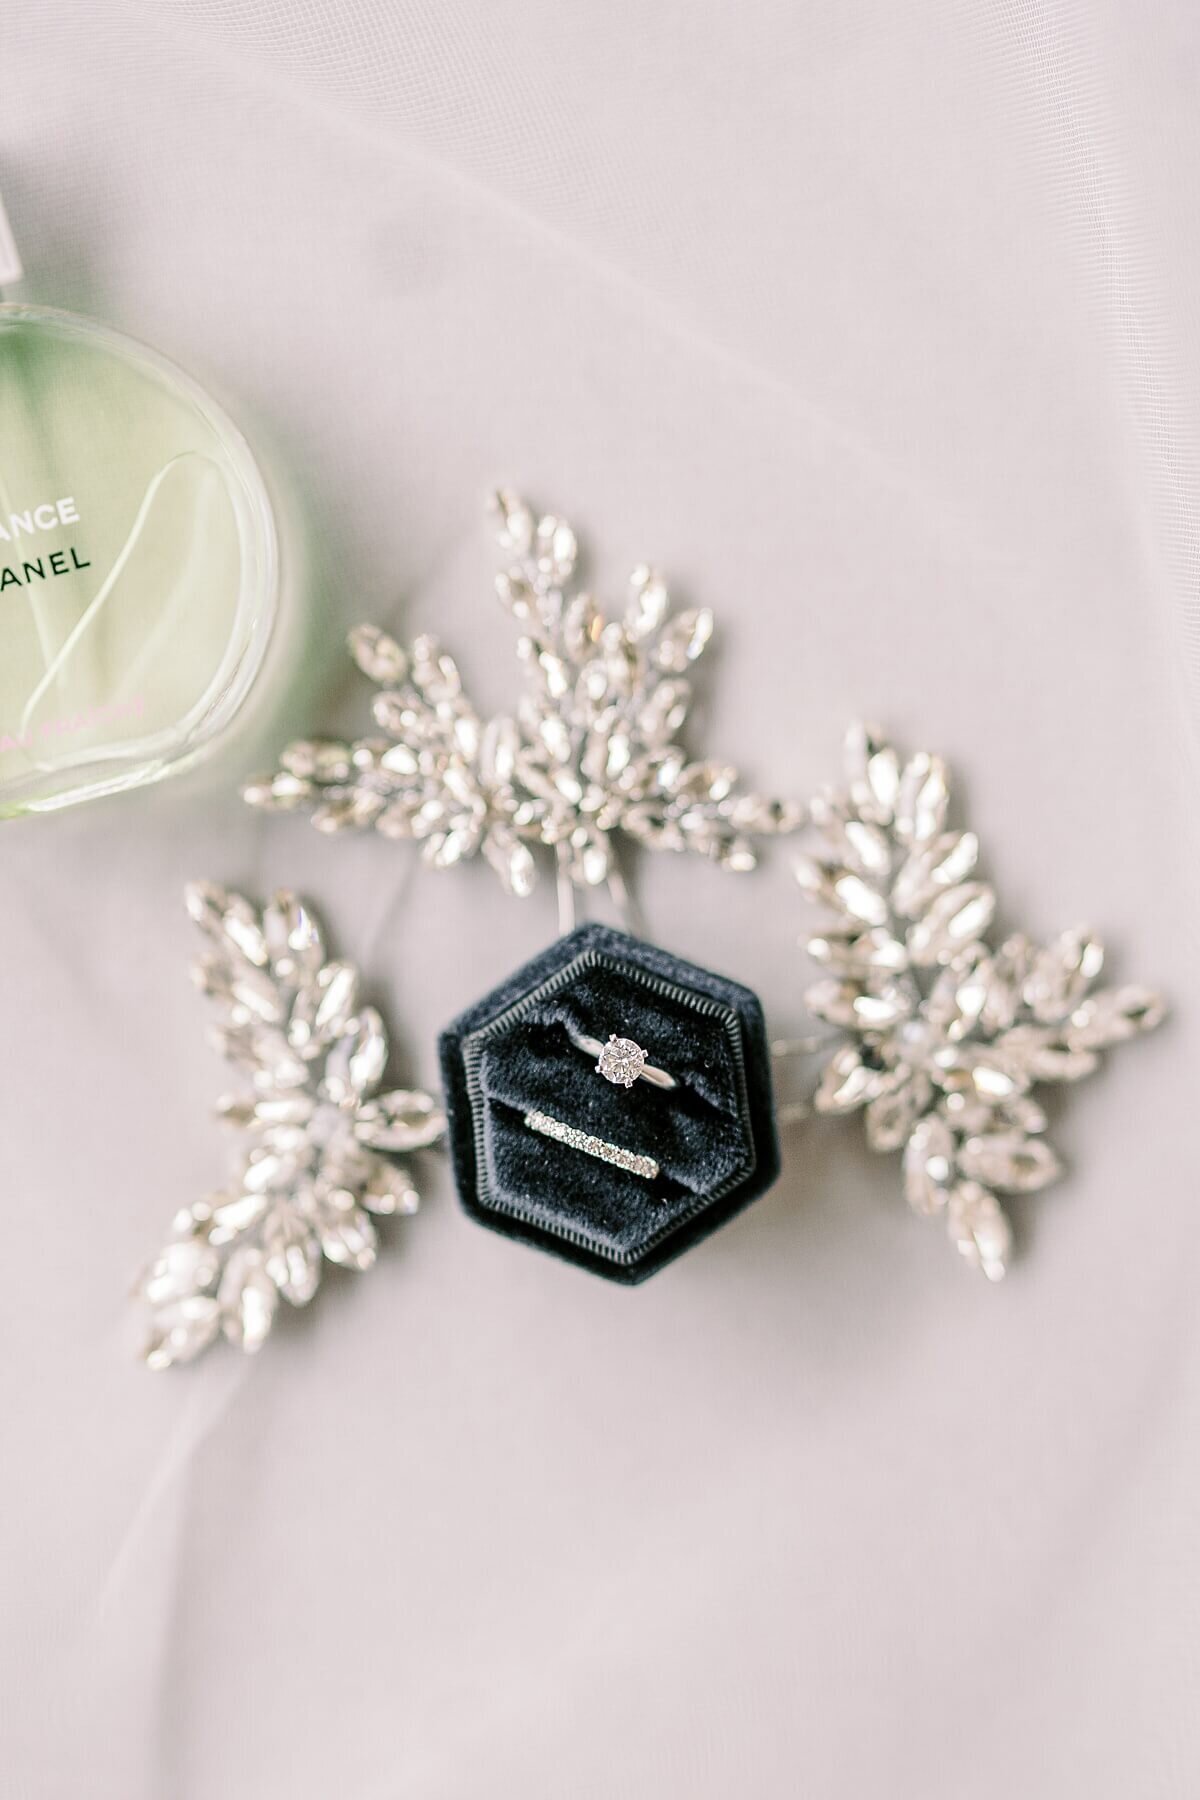 Black and White Wedding Details at The Annex Wedding Venue photographed by Alicia Yarrish Photography